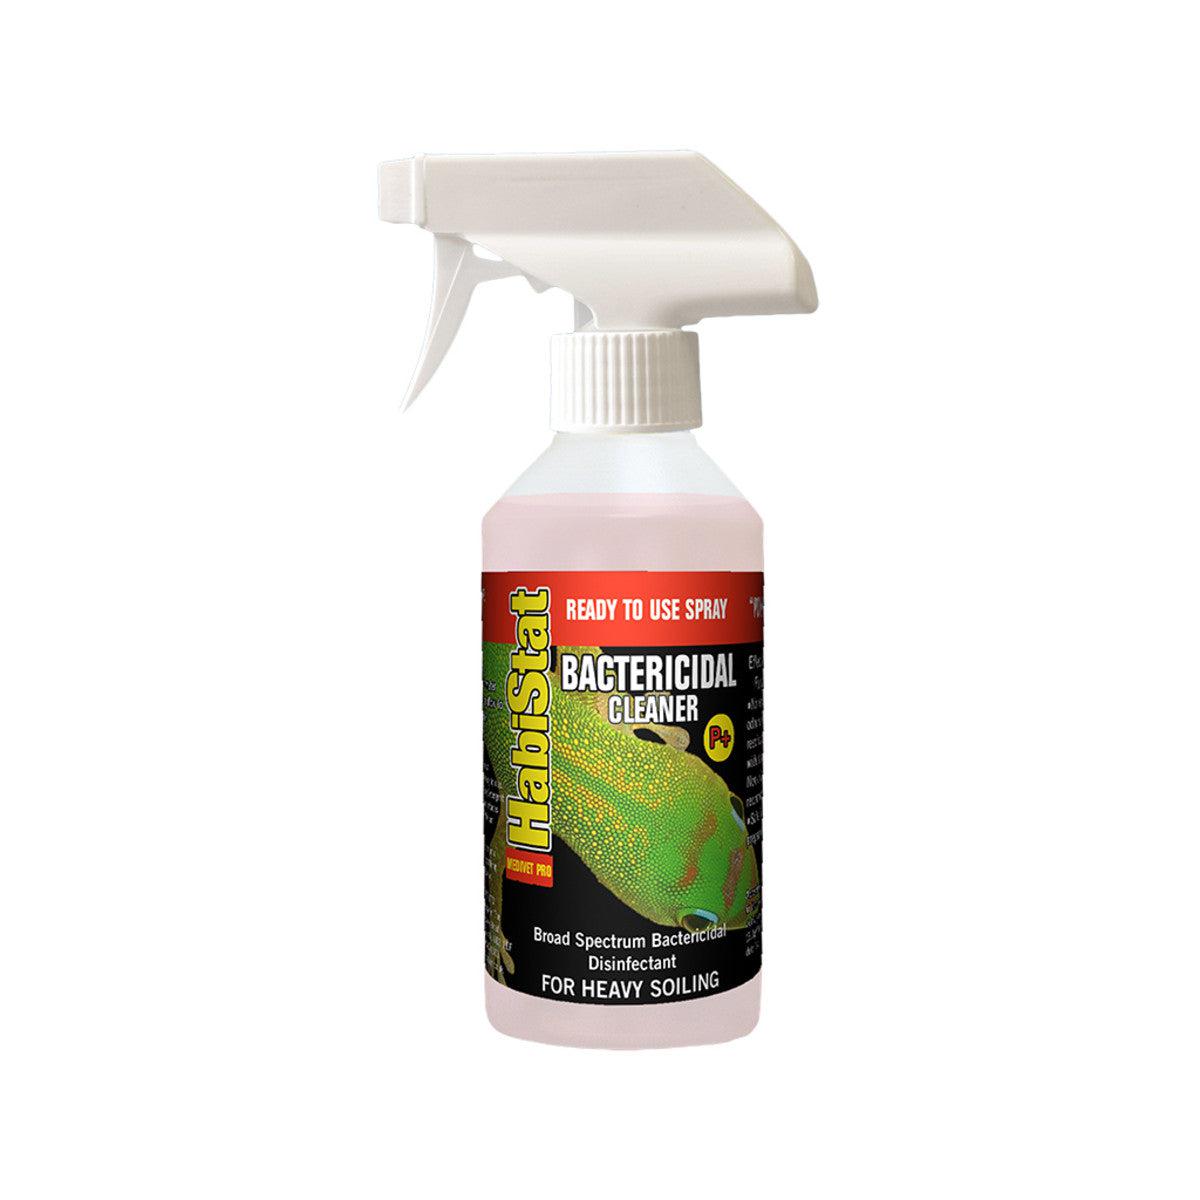 HabiStat Bactericidal Cleaner, Power Plus, Ready to Use Spray